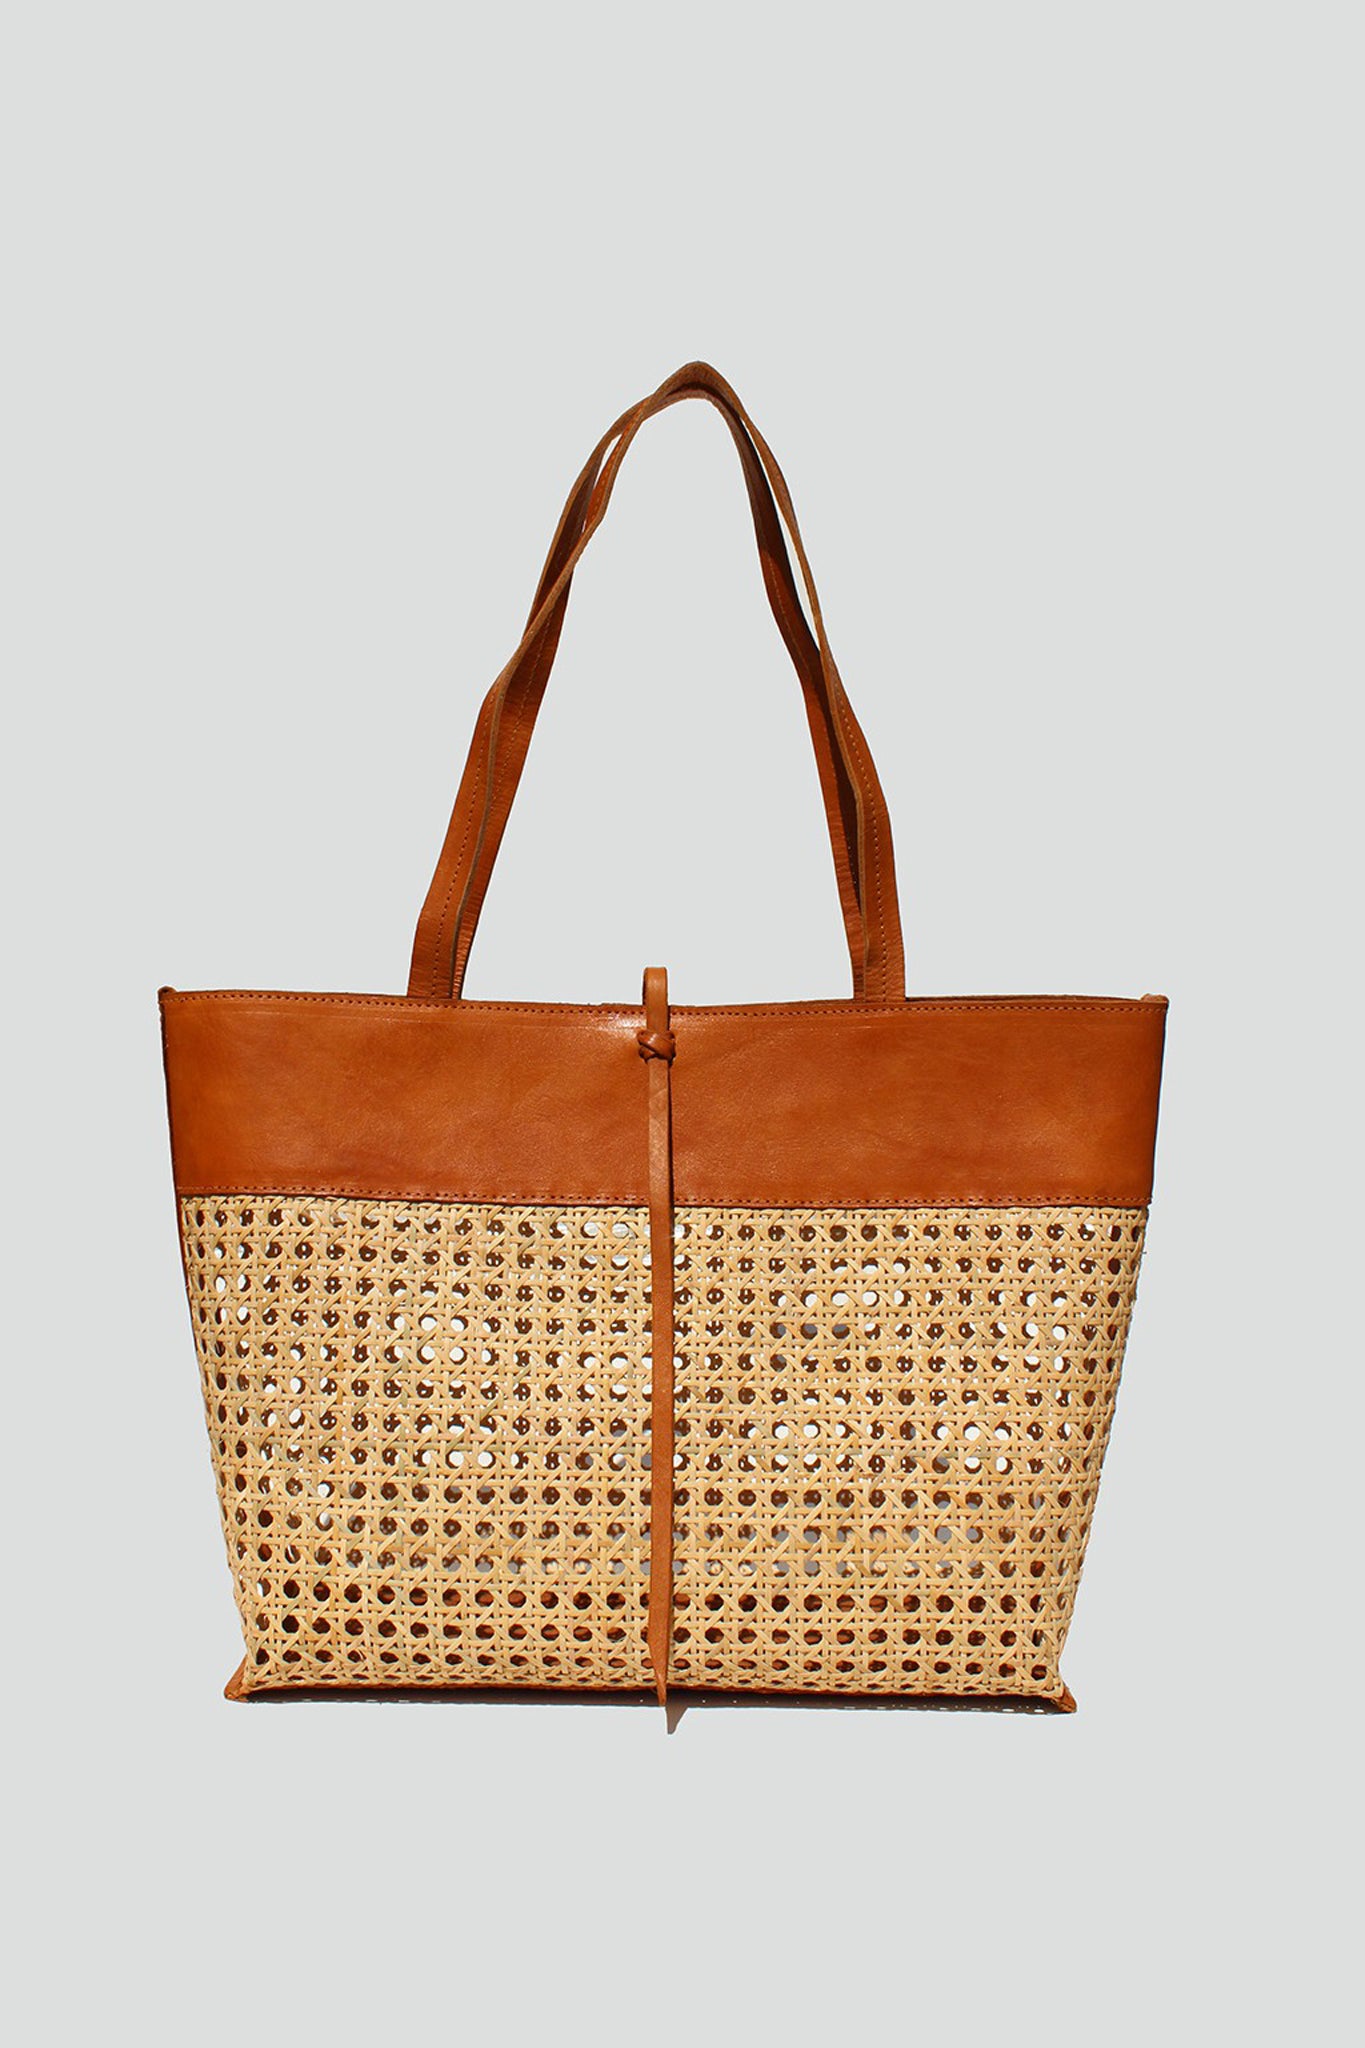 View 1 of Roro Tote in Tan, a Bags from Larrea Cove. Detail: Capture the sunny coastal vibes with the oh-so stylish Roro Tote in Tan.